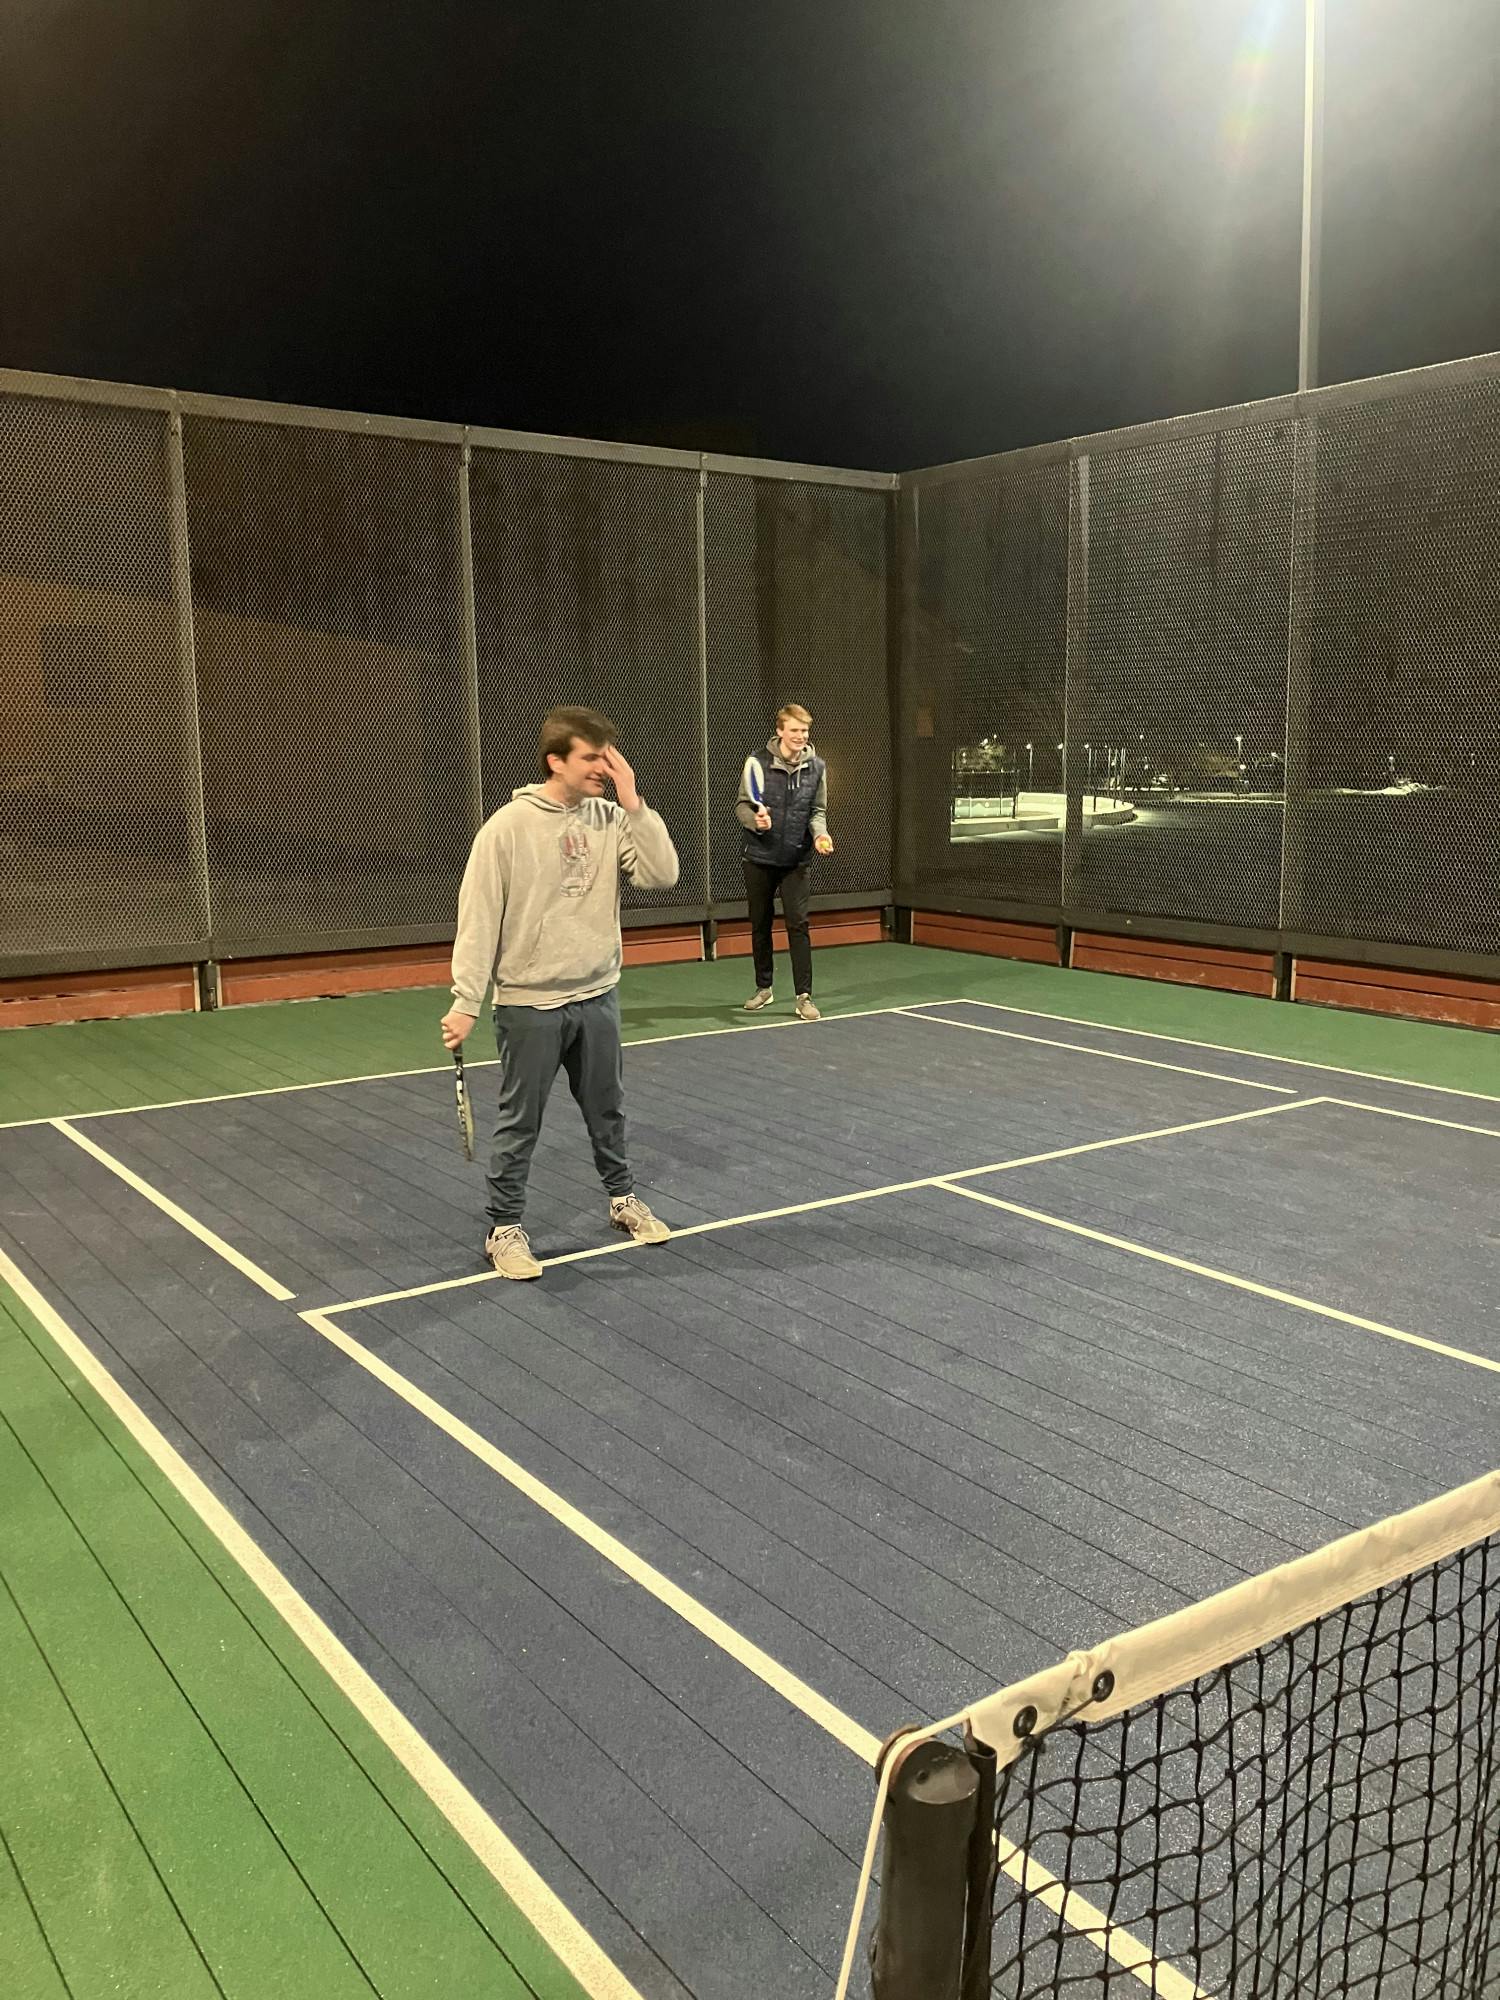 Paddle tennis and pickleball: Racket sports spread on Middlebury's campus -  The Middlebury Campus